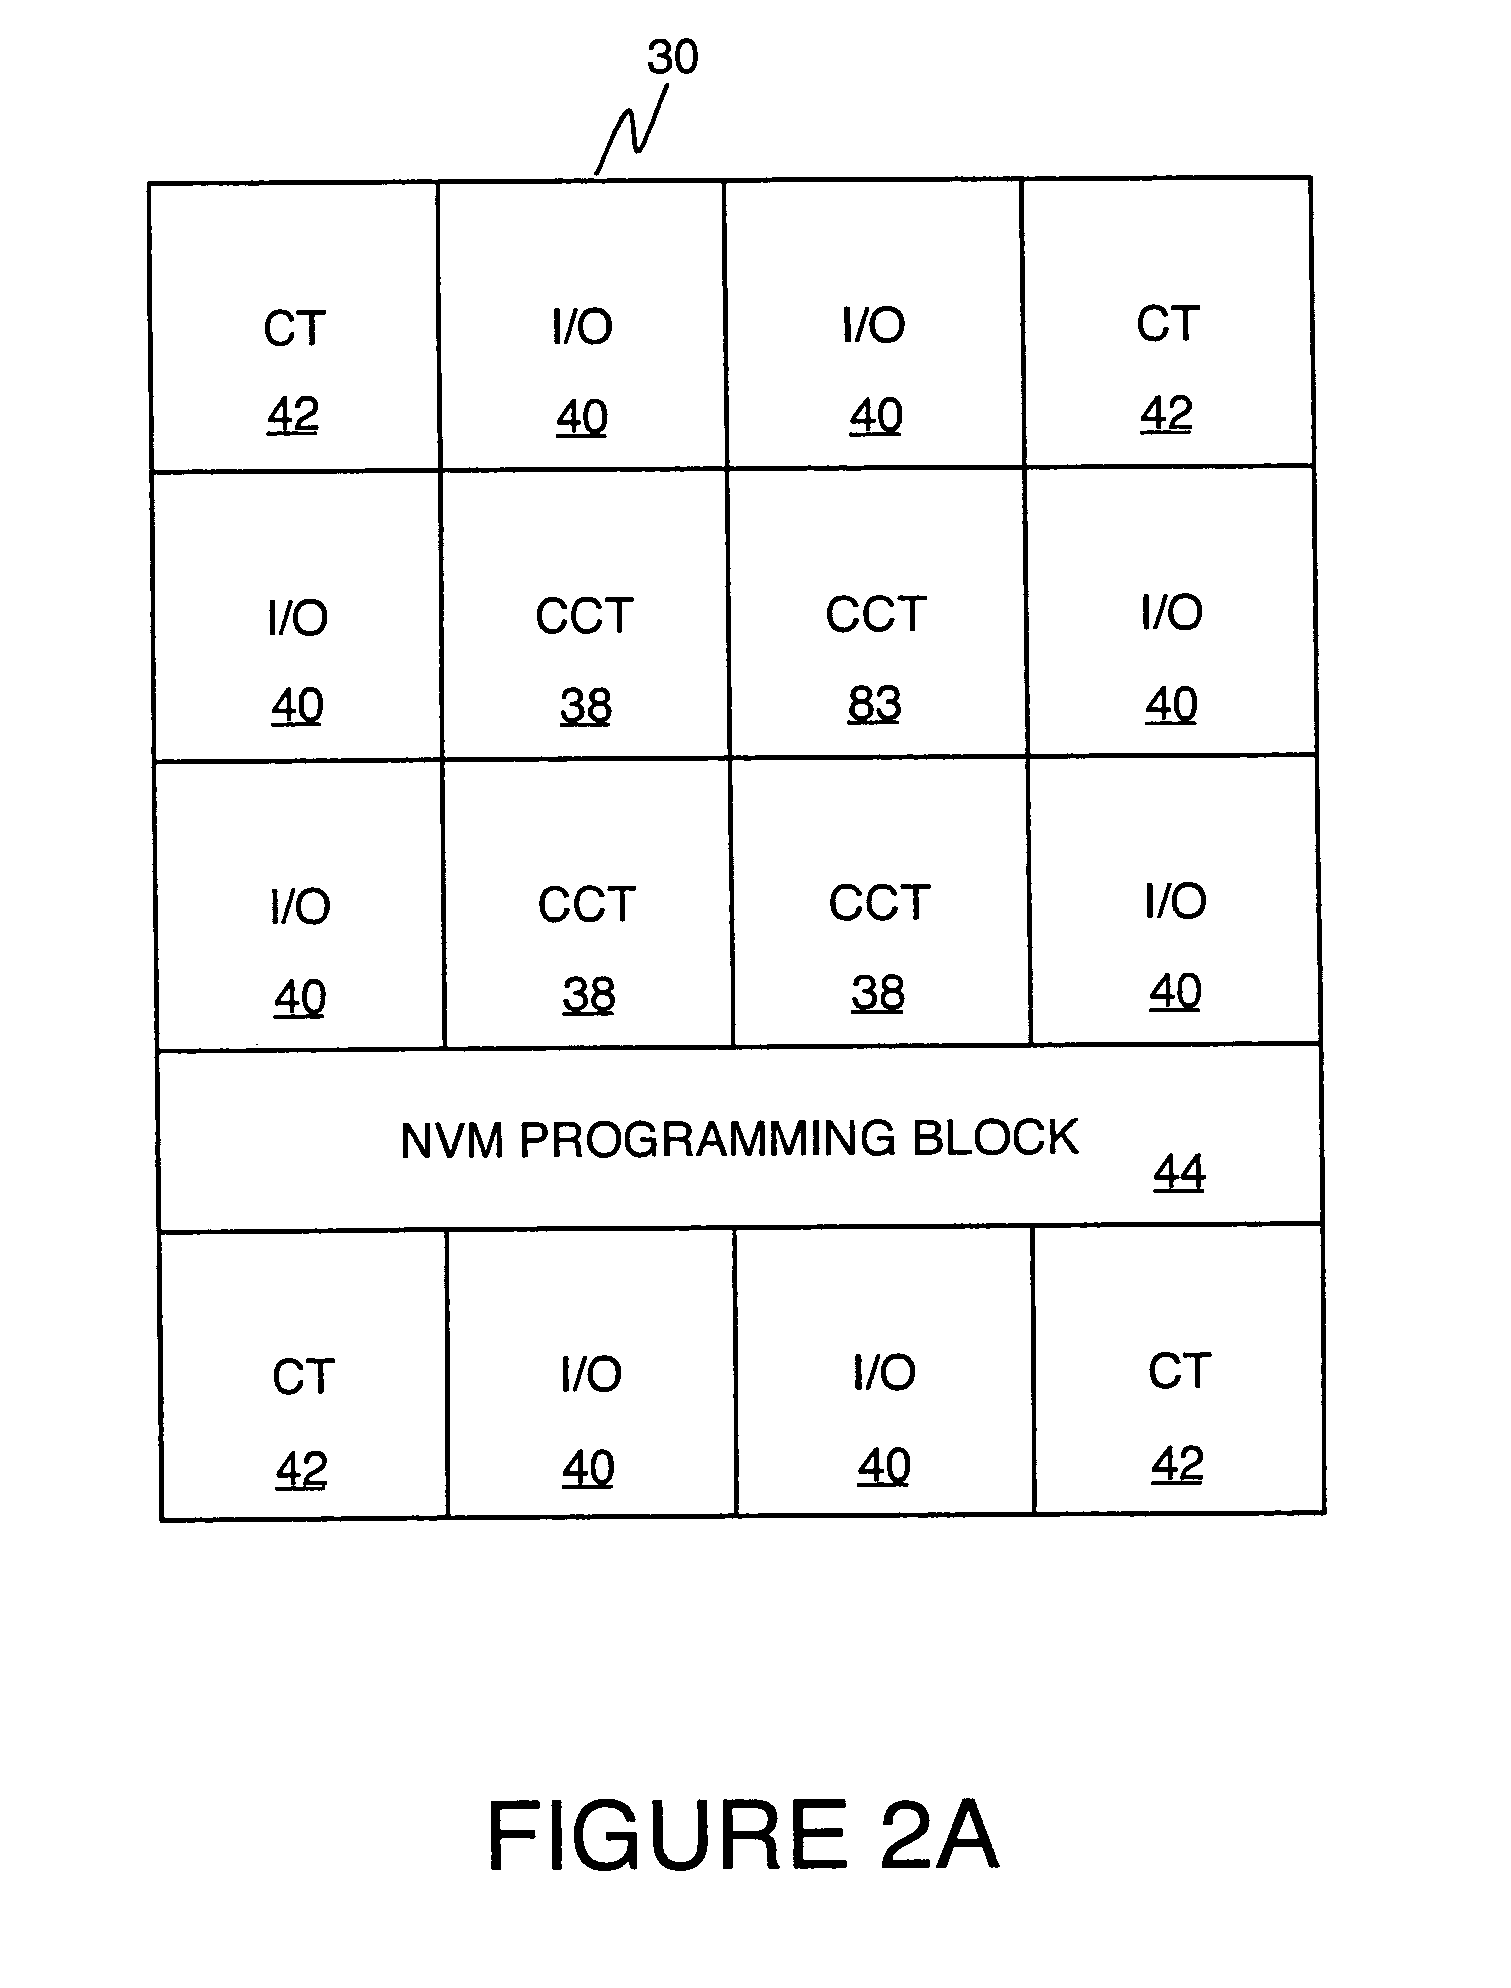 Architecture for face-to-face bonding between substrate and multiple daughter chips